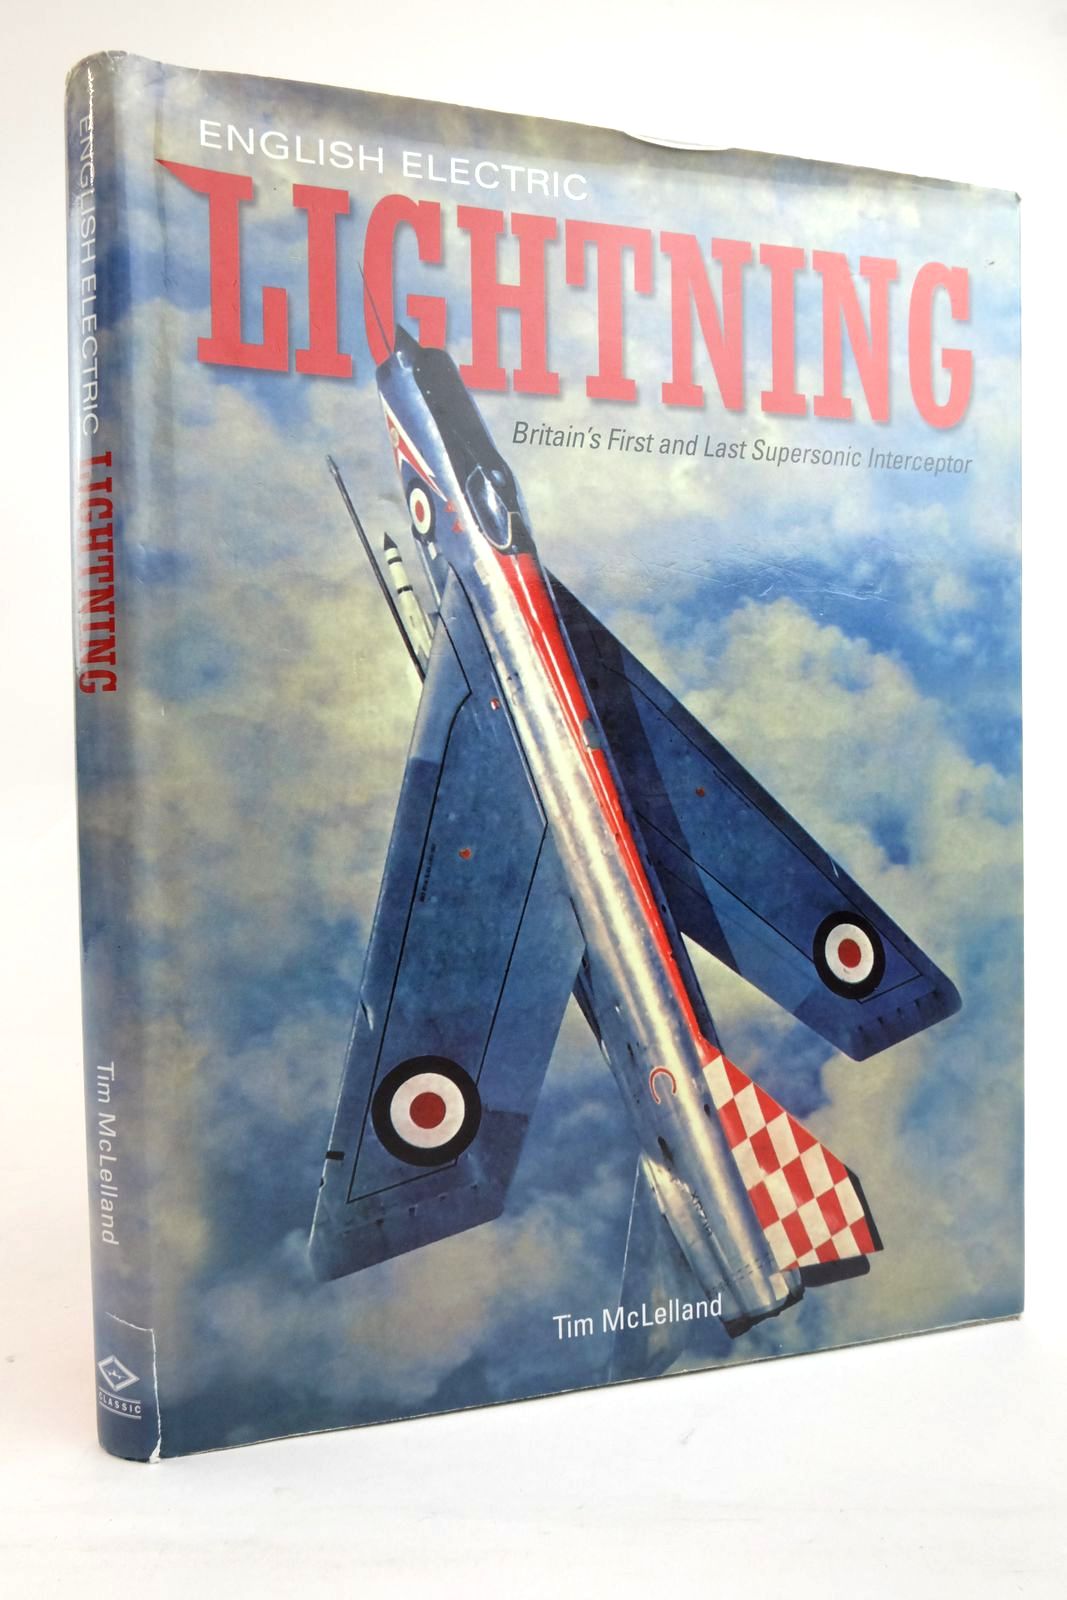 Photo of ENGLISH ELECTRIC LIGHTNING: BRITAIN'S FIRST AND LAST SUPERSONIC INTERCEPTOR written by McLelland, Tim published by Classic (STOCK CODE: 2136409)  for sale by Stella & Rose's Books